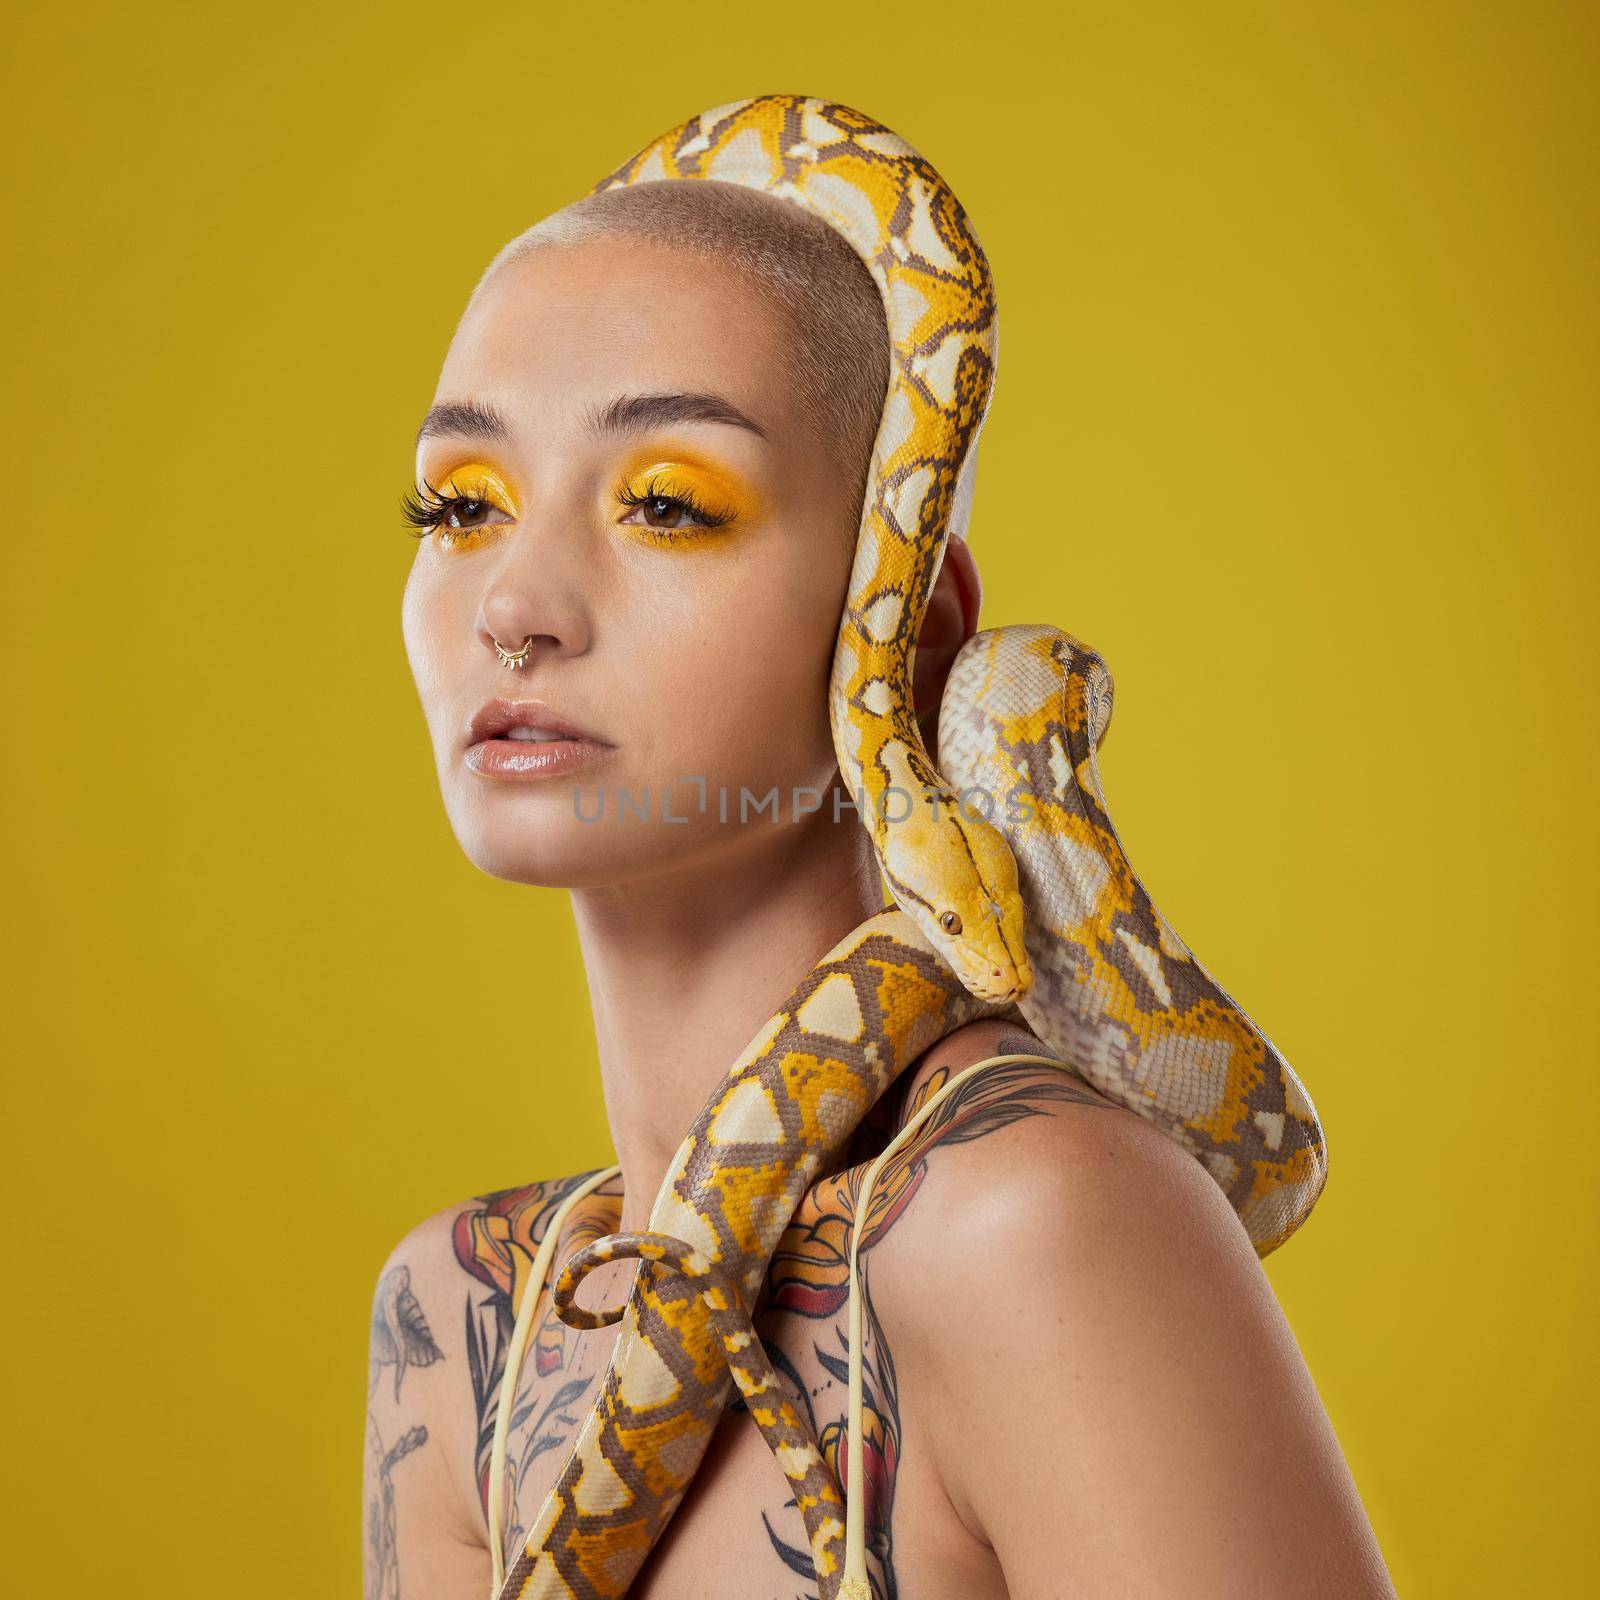 Lost in reality. Shot of a young woman posing with a snake on her head against a yellow background. by YuriArcurs